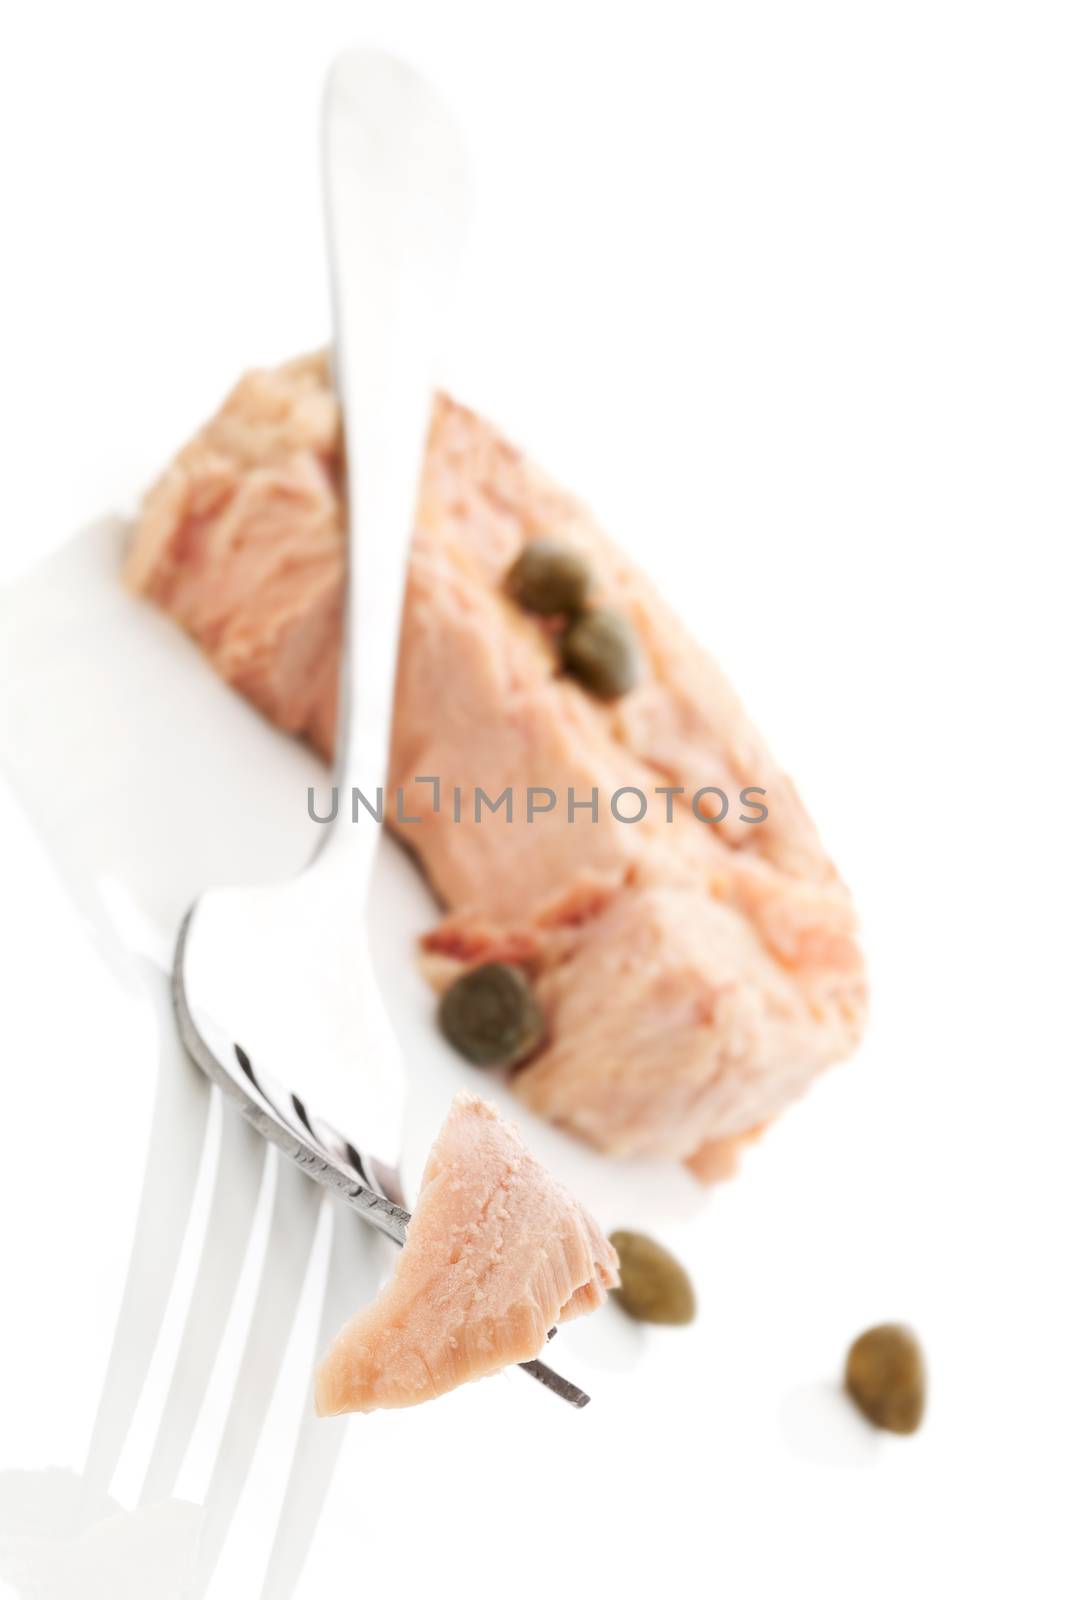 Tuna piece on fork and canned tuna steak with capers isolated on white background. Culinary seafood eating.